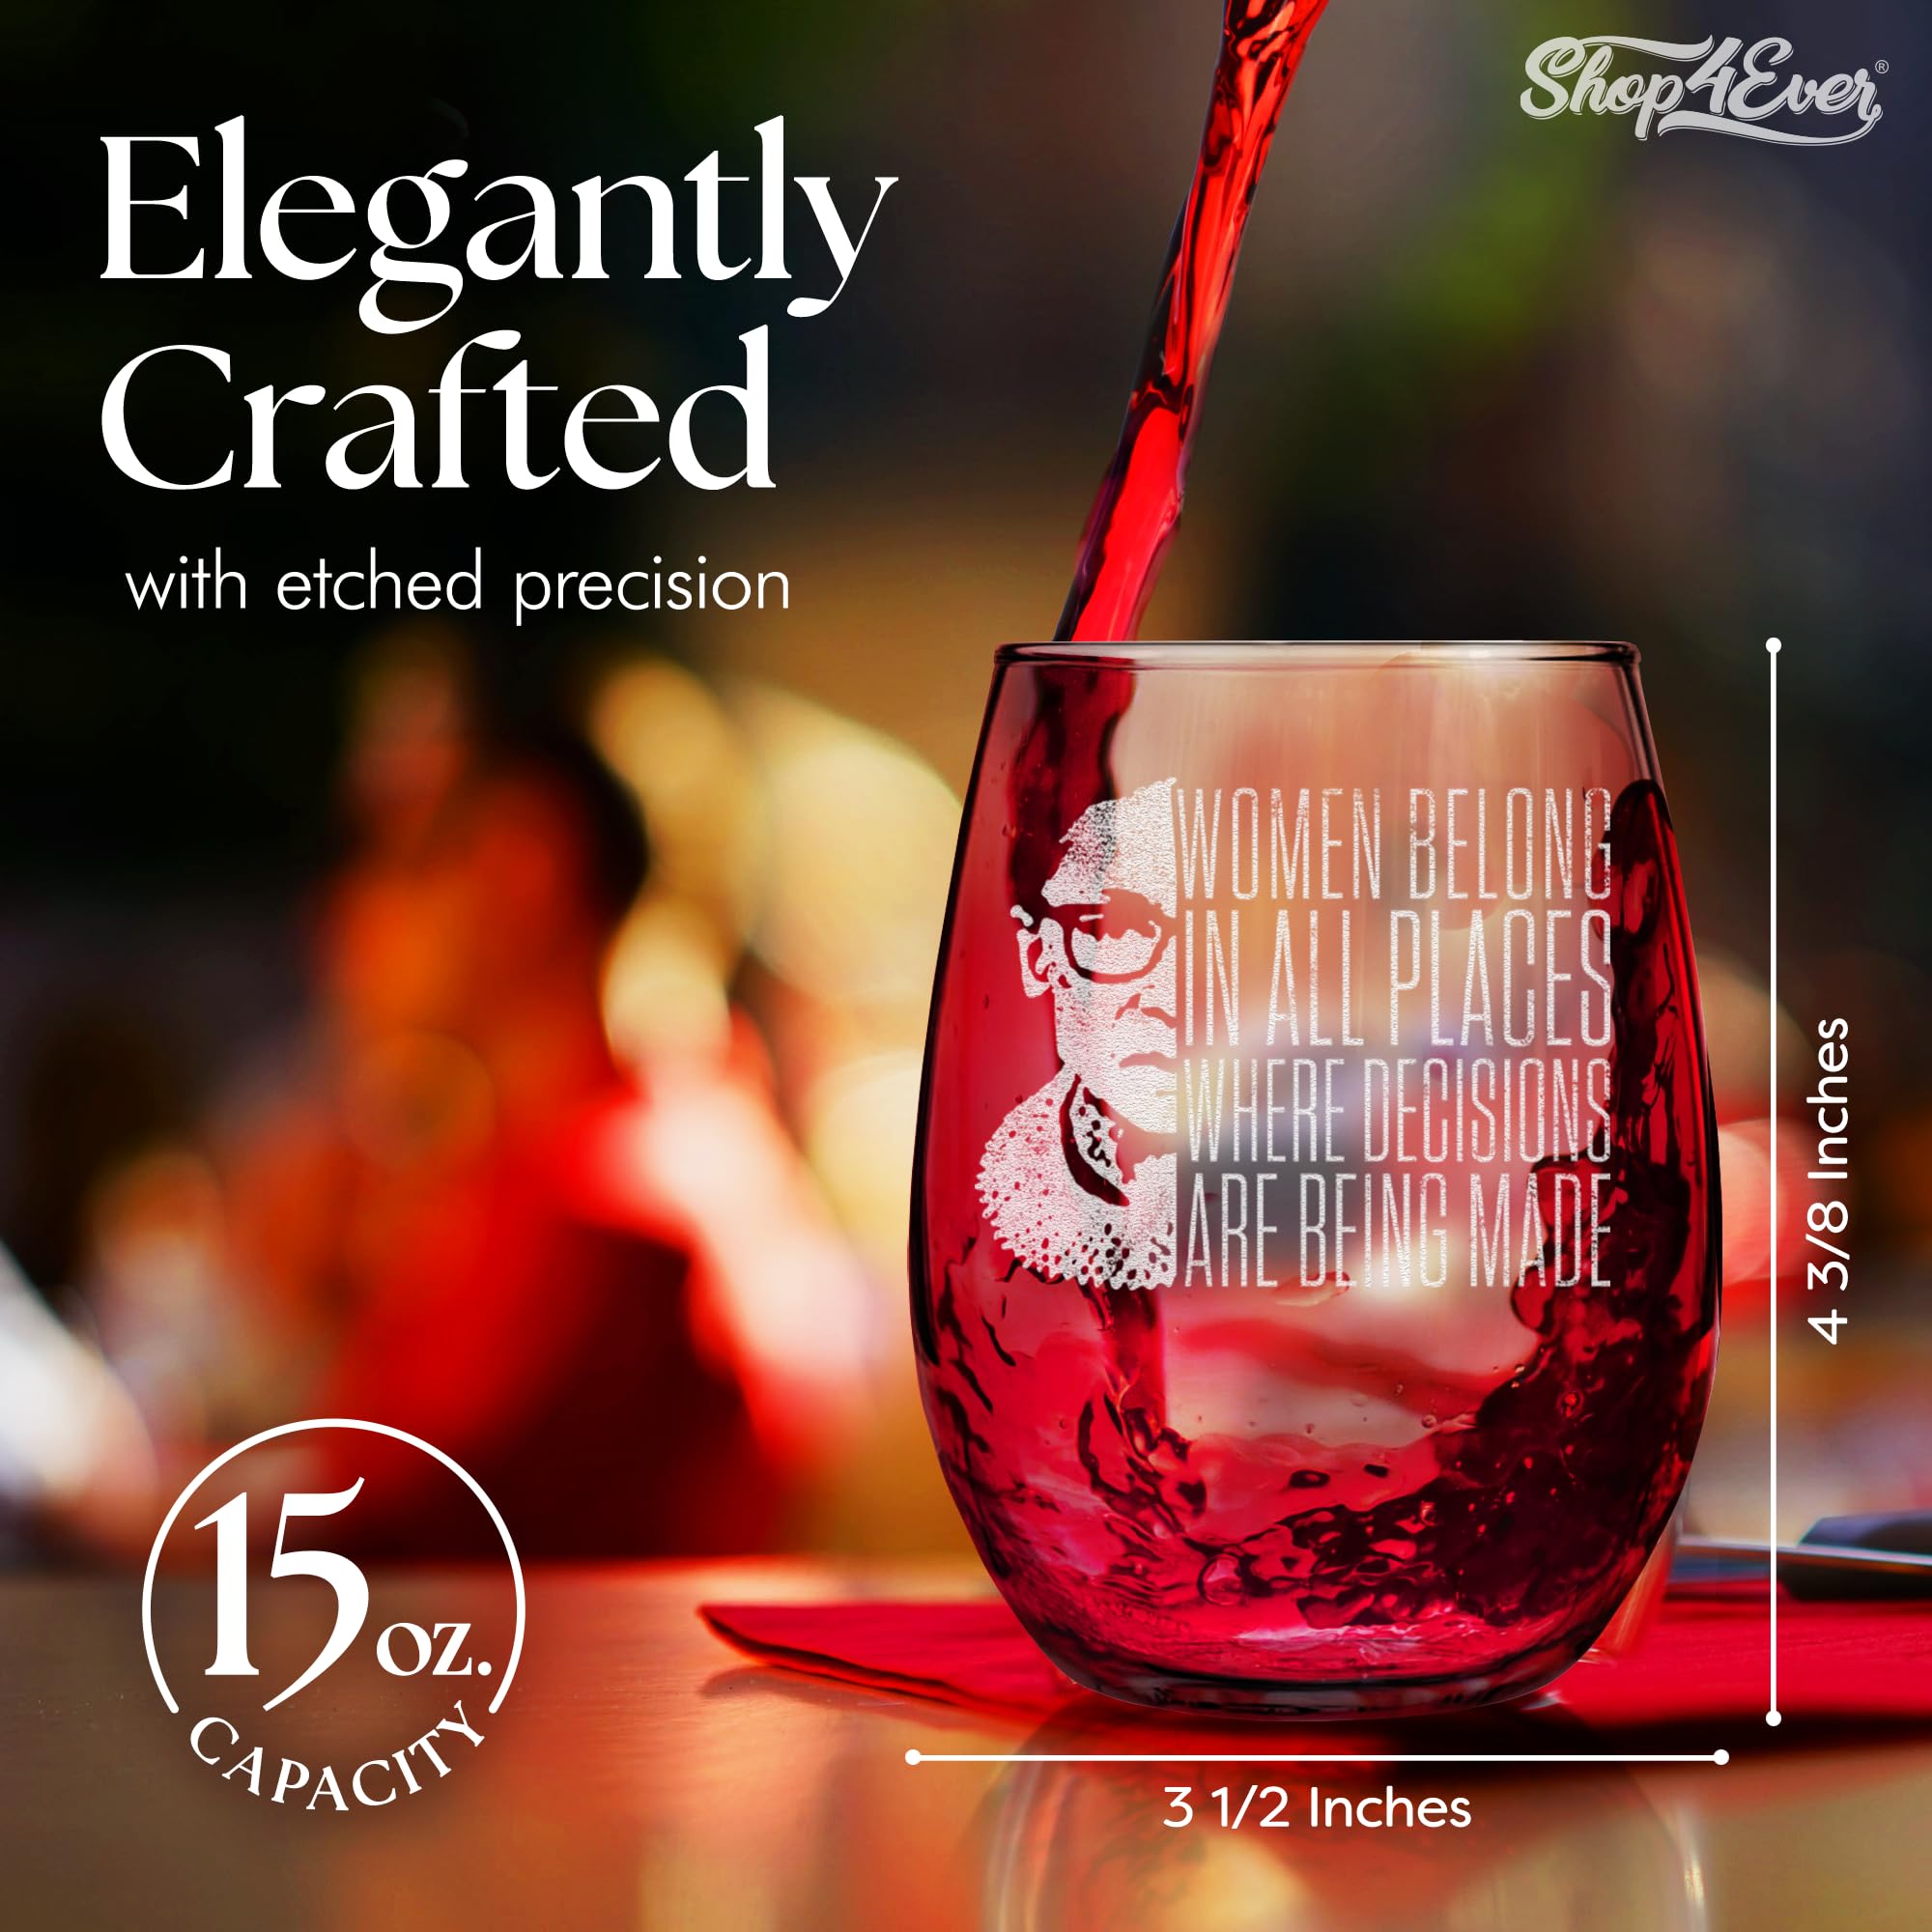 shop4ever Women Belong In All Places Where Decisions Are Being Made Engraved Stemless Wine Glass Ruth Bader Ginsburg RBG Wine Glass